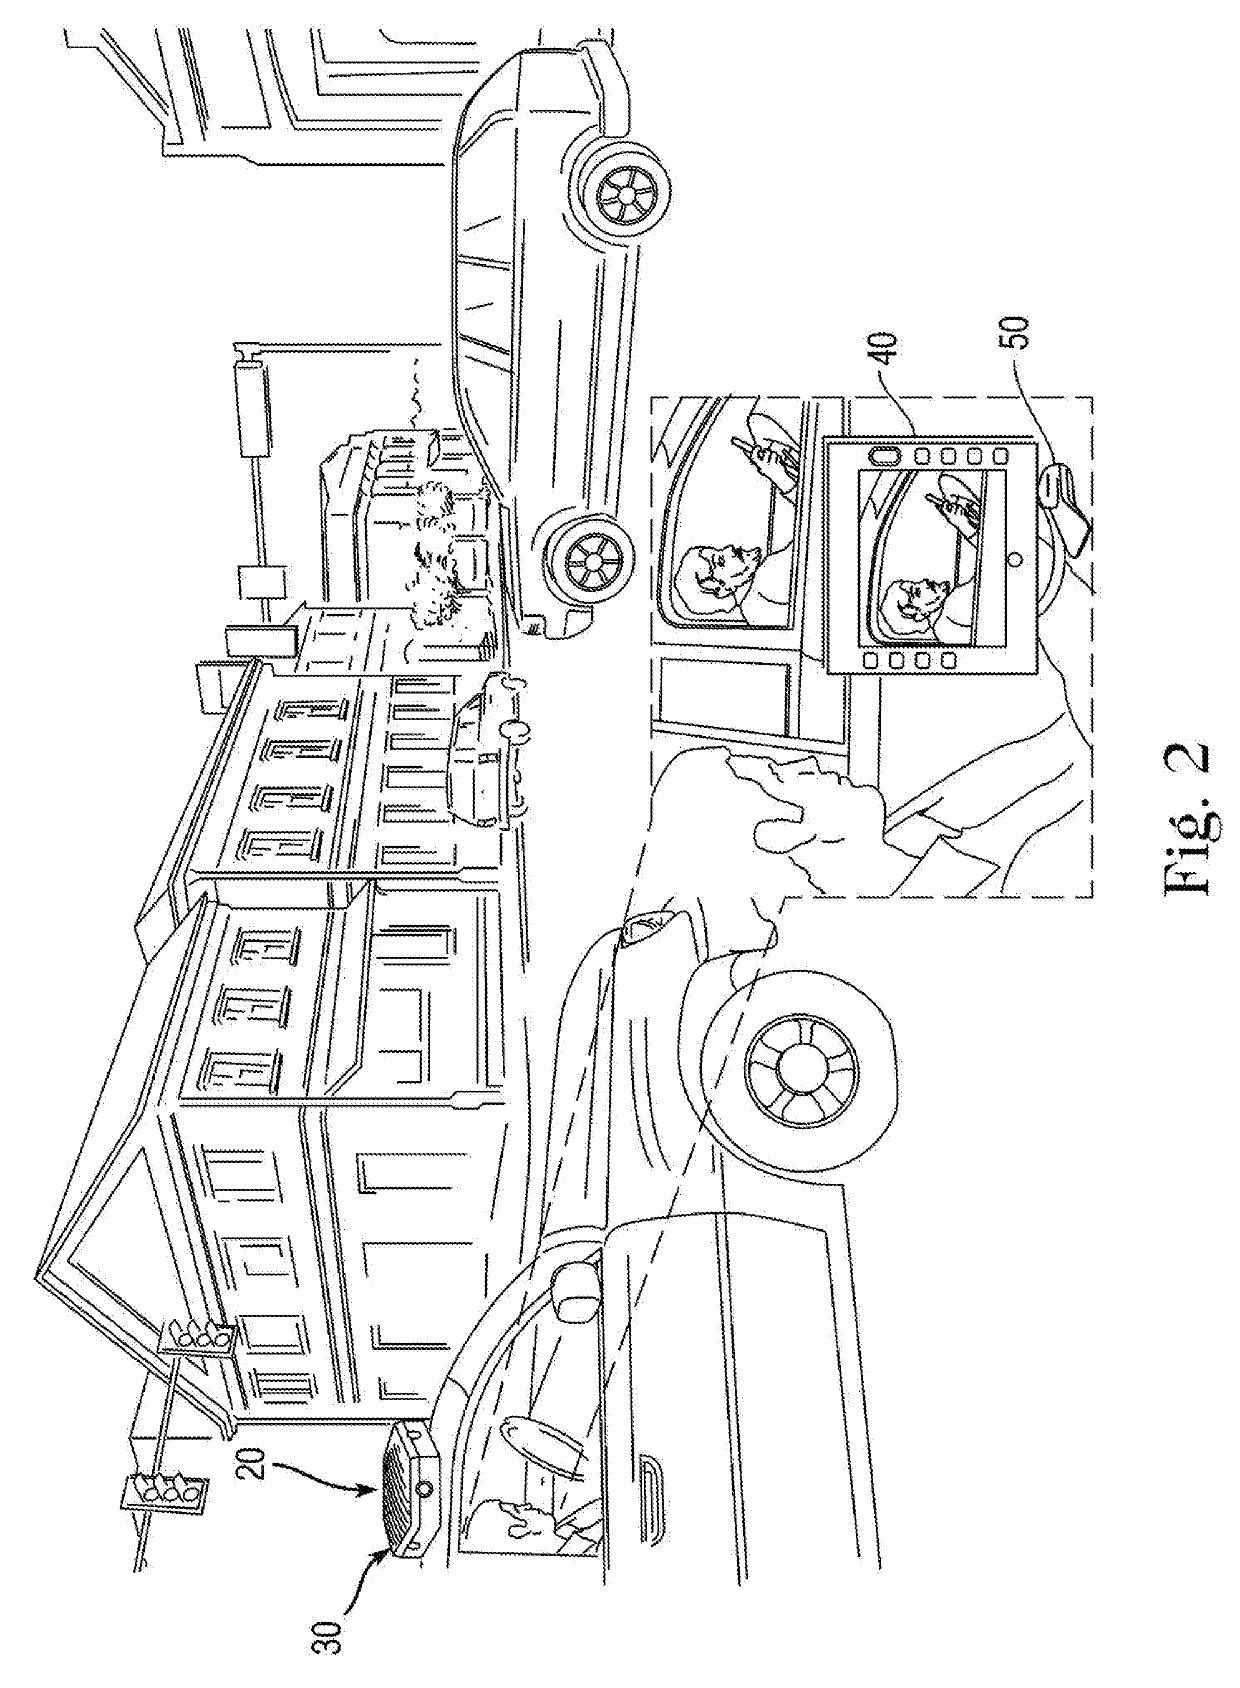 Mobile traffic violation detection, recording and evidence processing system